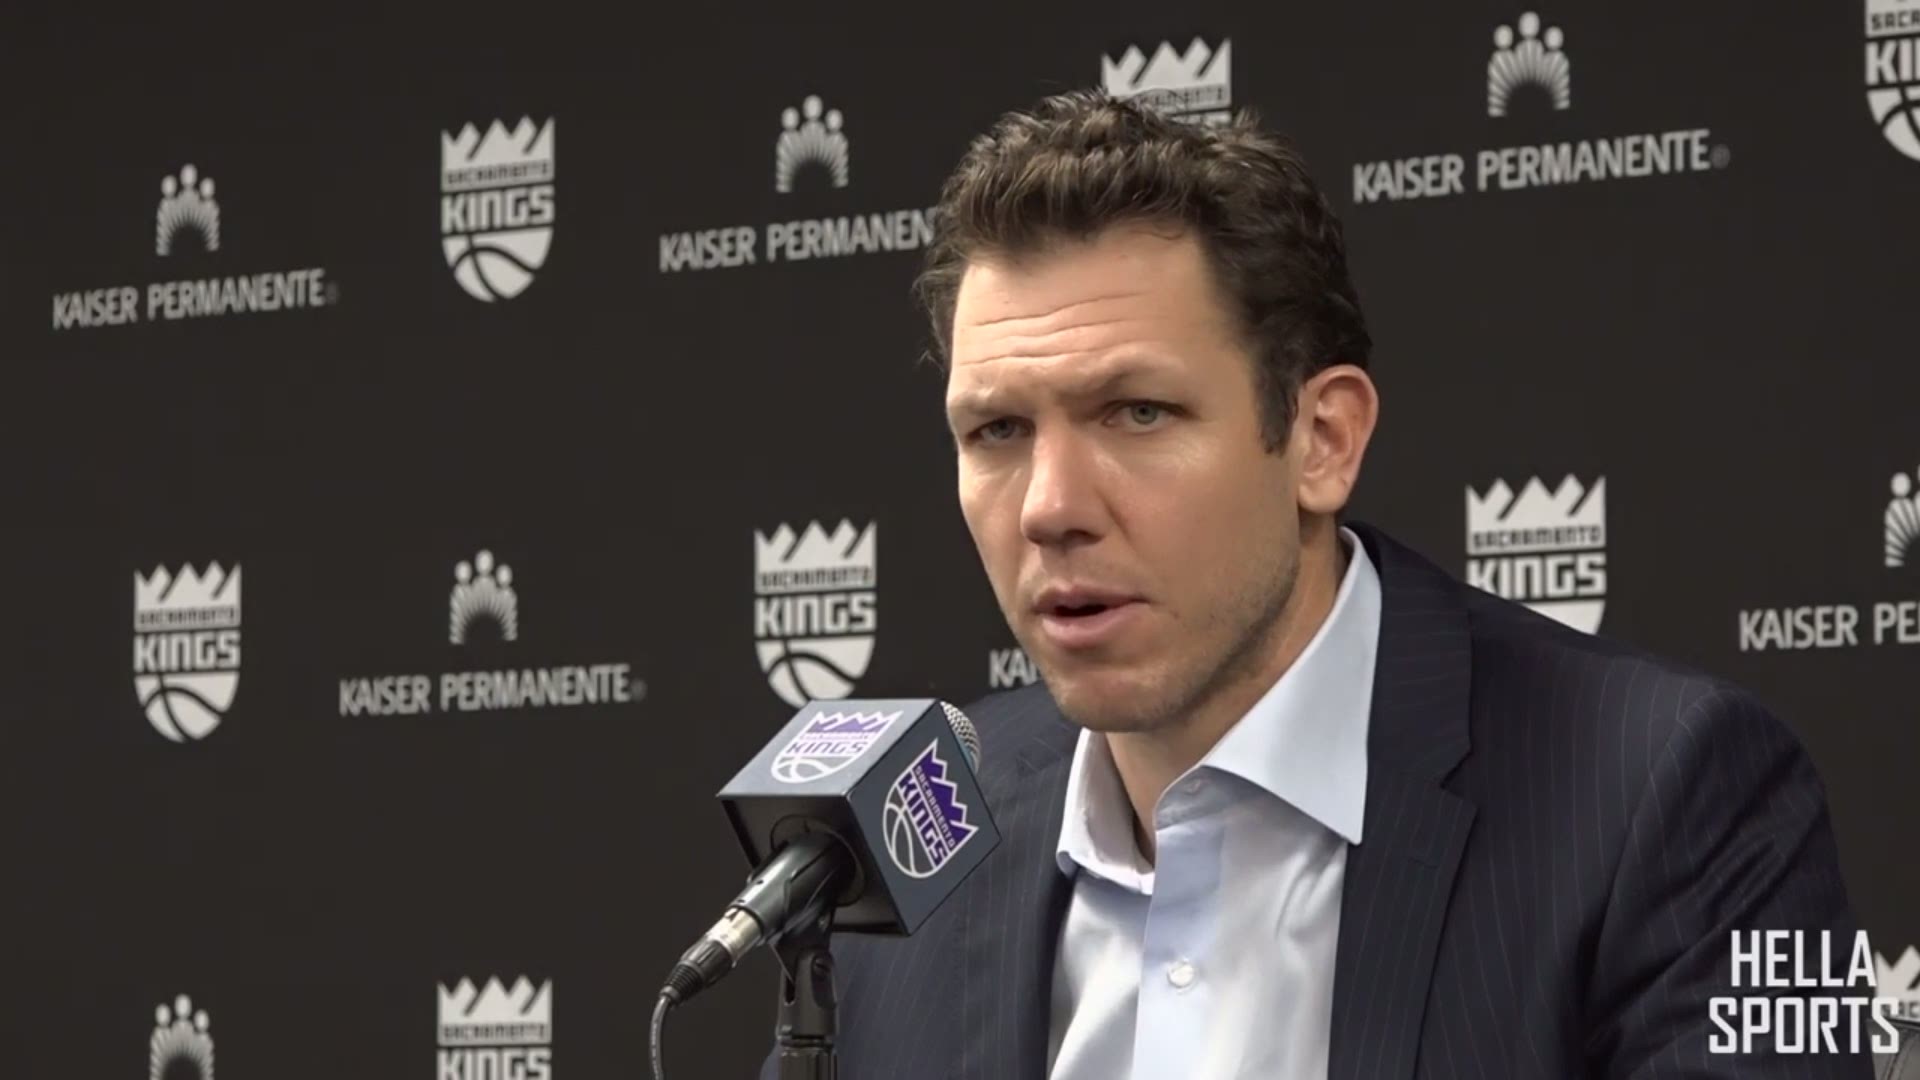 Sacramento Kings coach Luke Walton says his team didn’t play at the same level from the first half to the second half in Monday's 114-112 loss to the Orlando Magic.